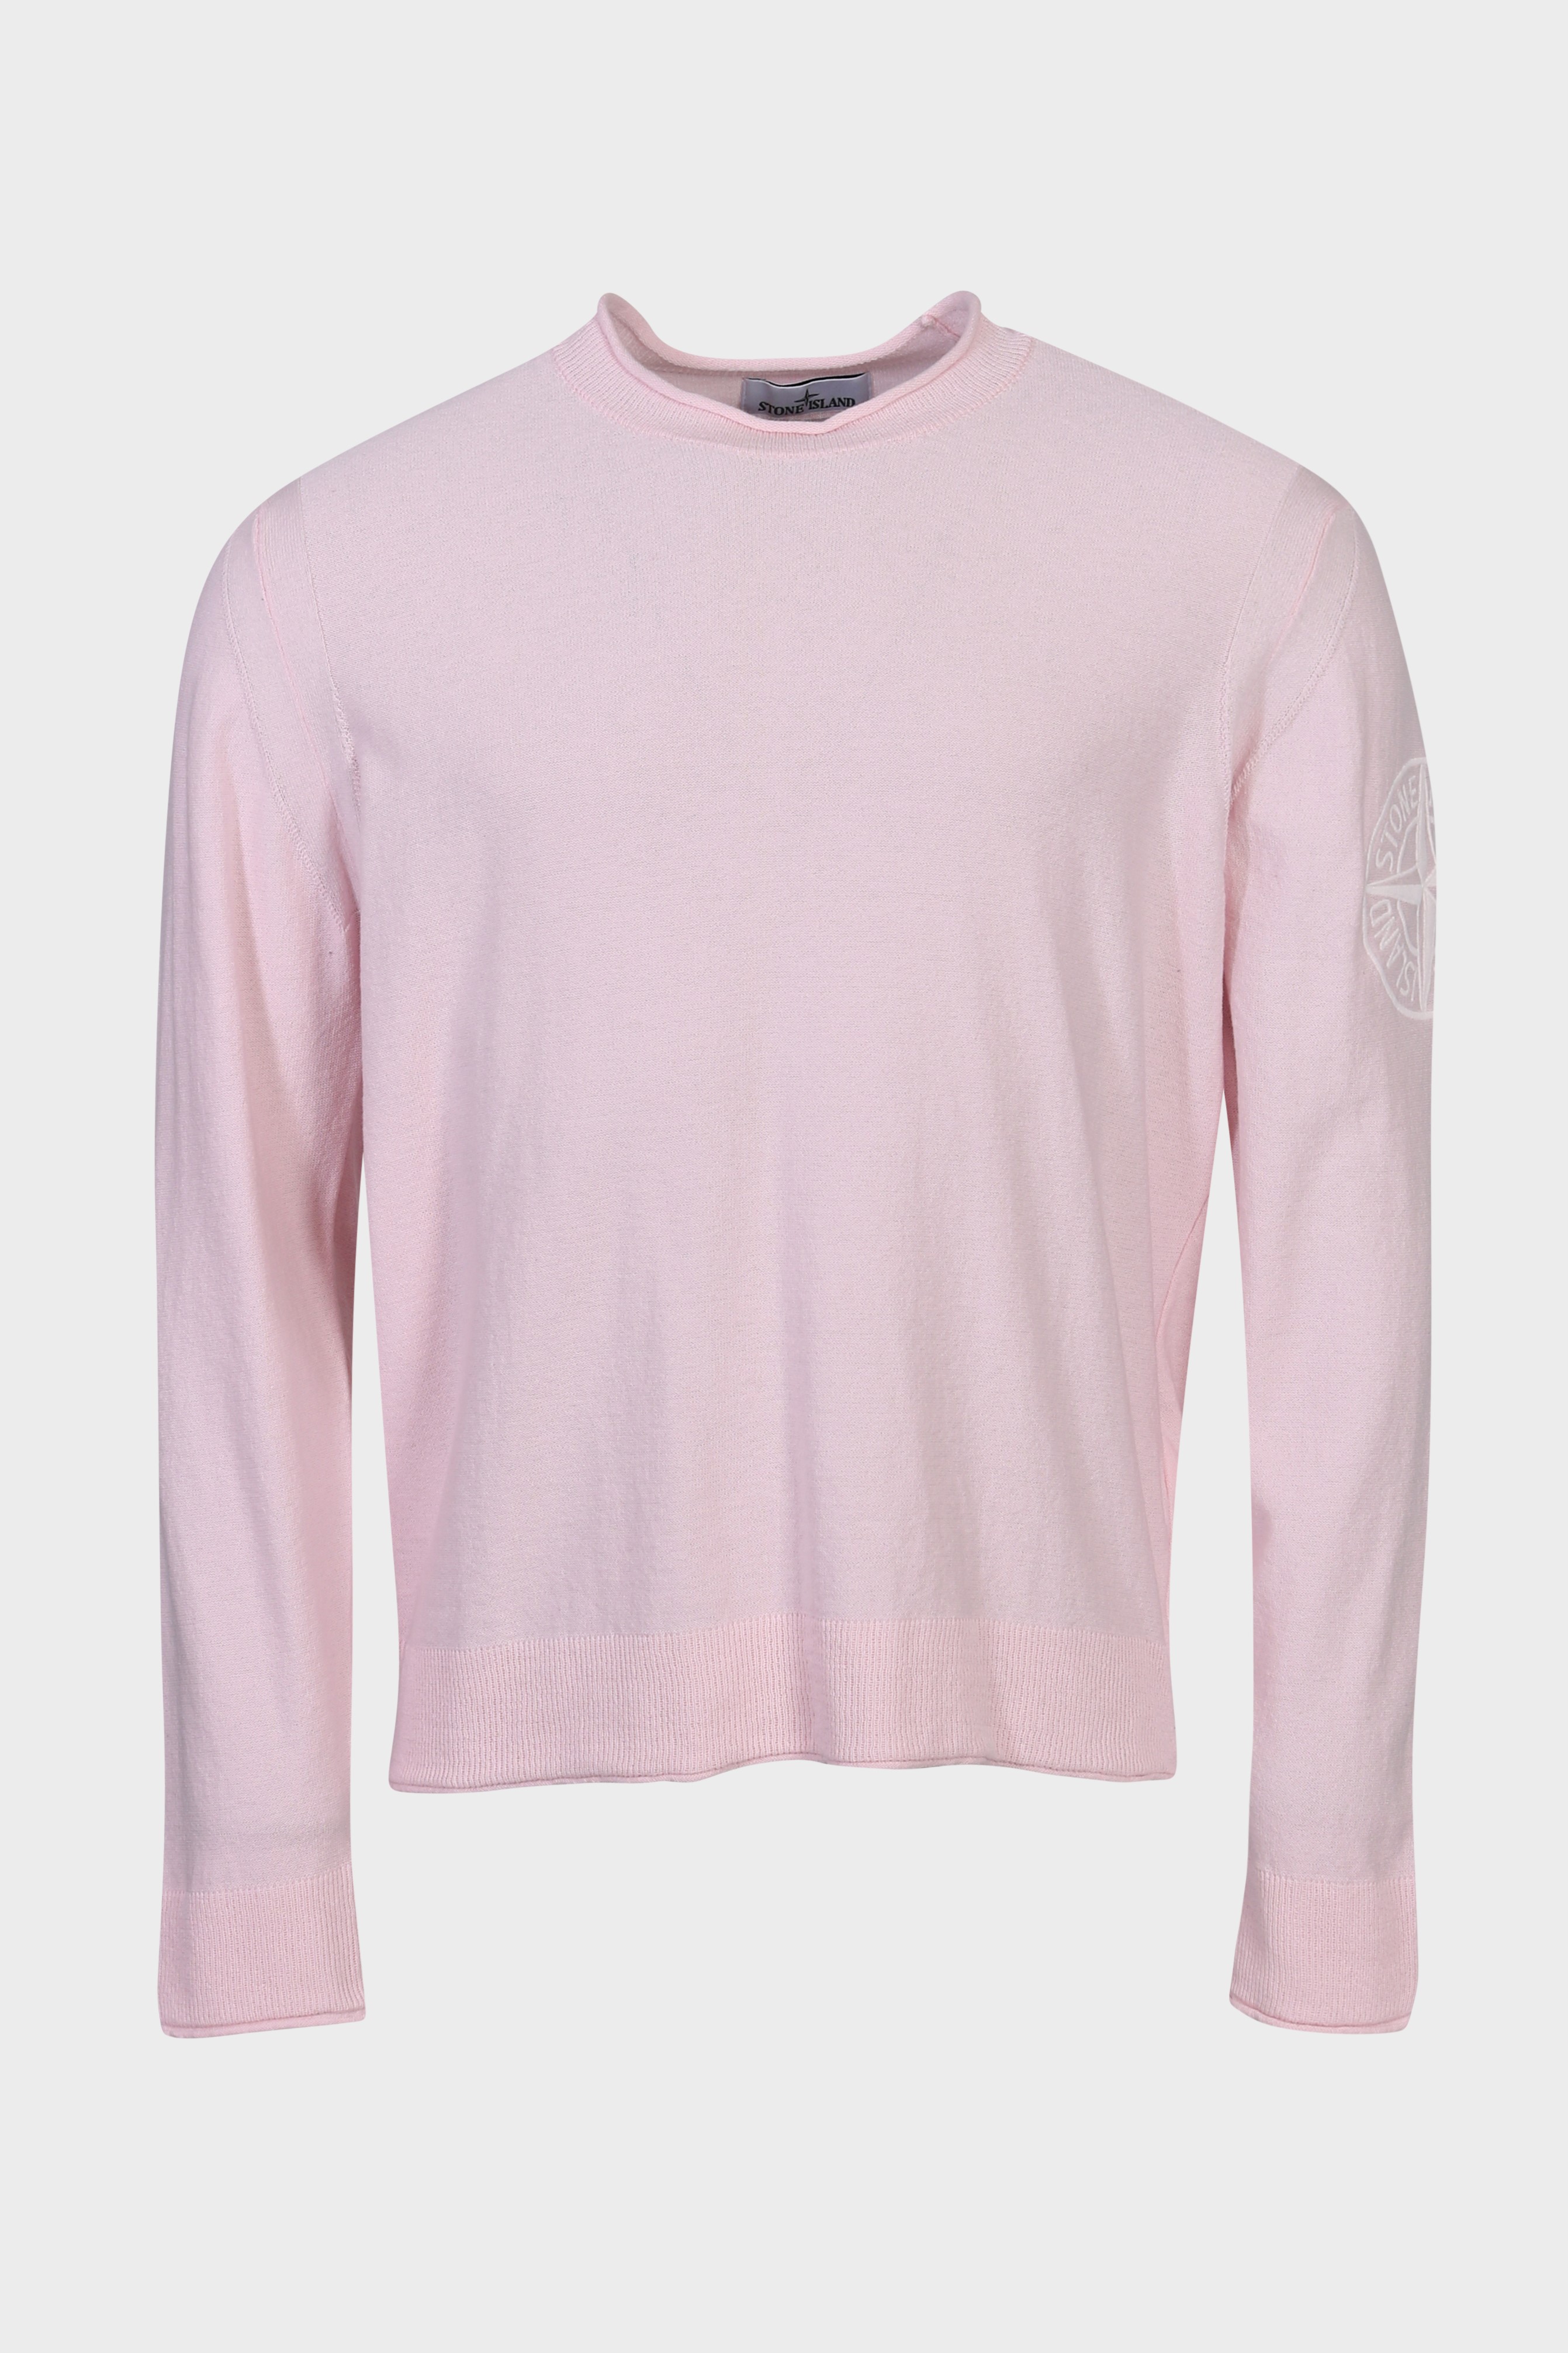 STONE ISLAND Cotton Knit Pullover in Light Pink